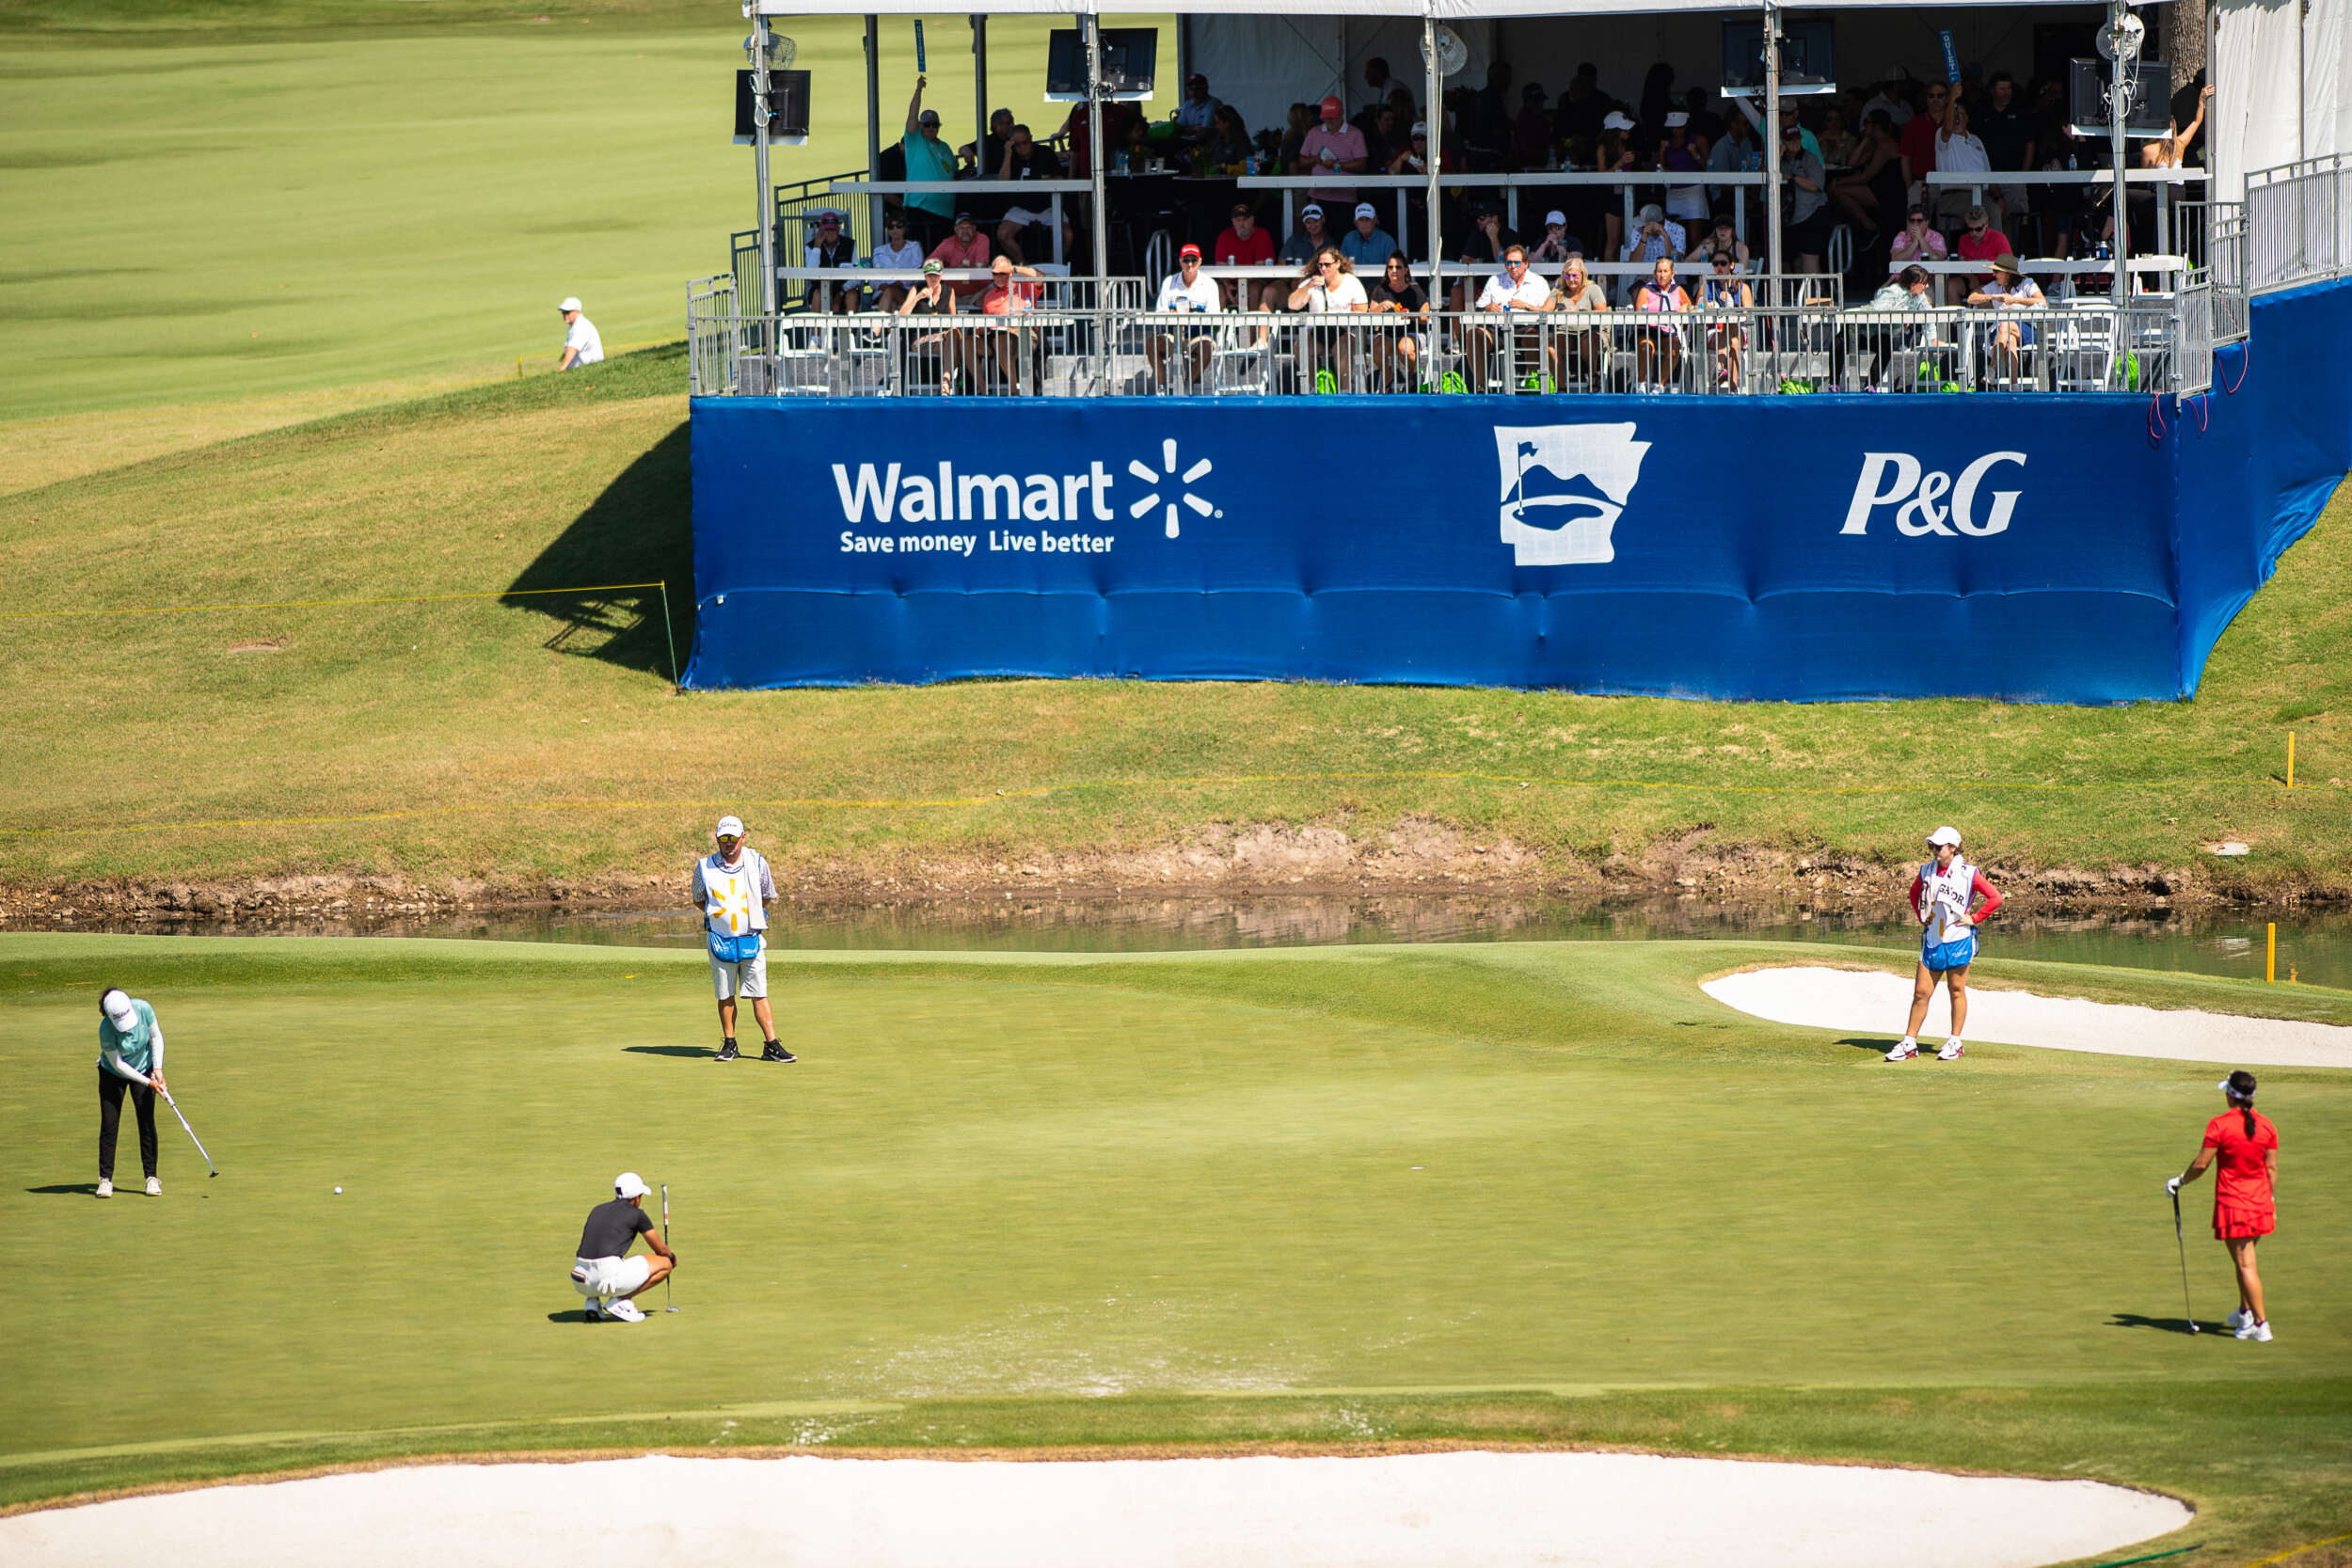 Walmart NW Arkansas Championship Presented by P&G Photo Gallery and